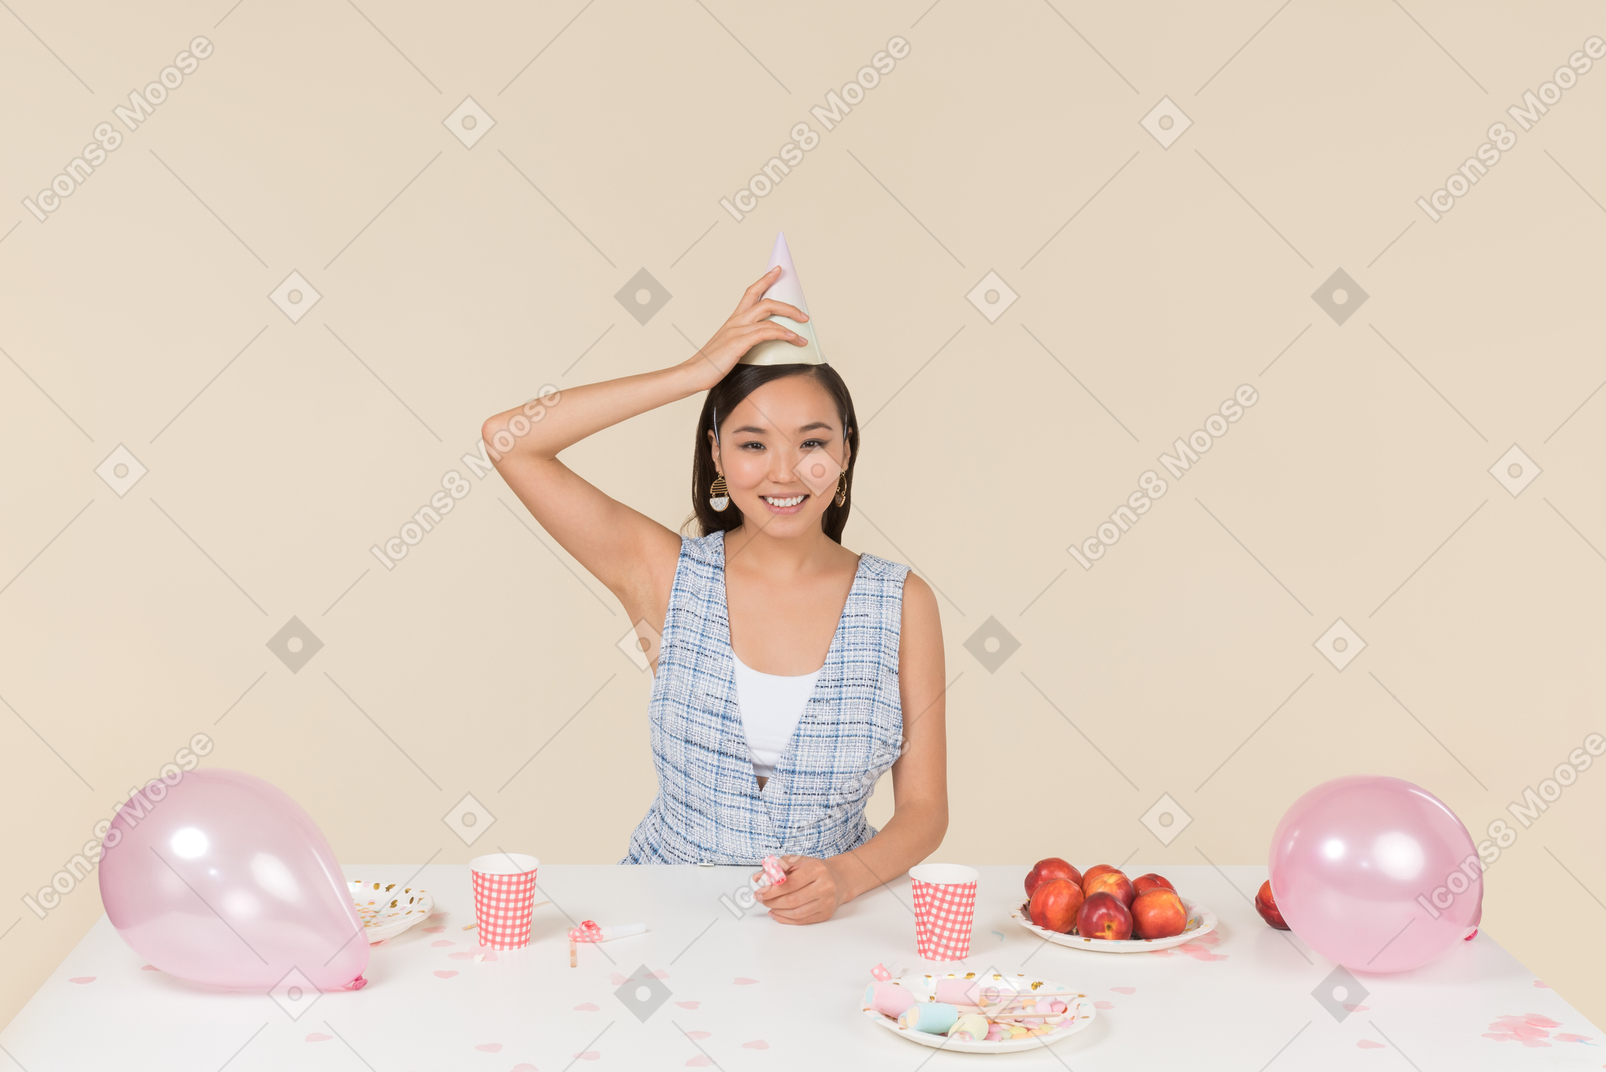 Young asian woman adjusting birthday cone on her head